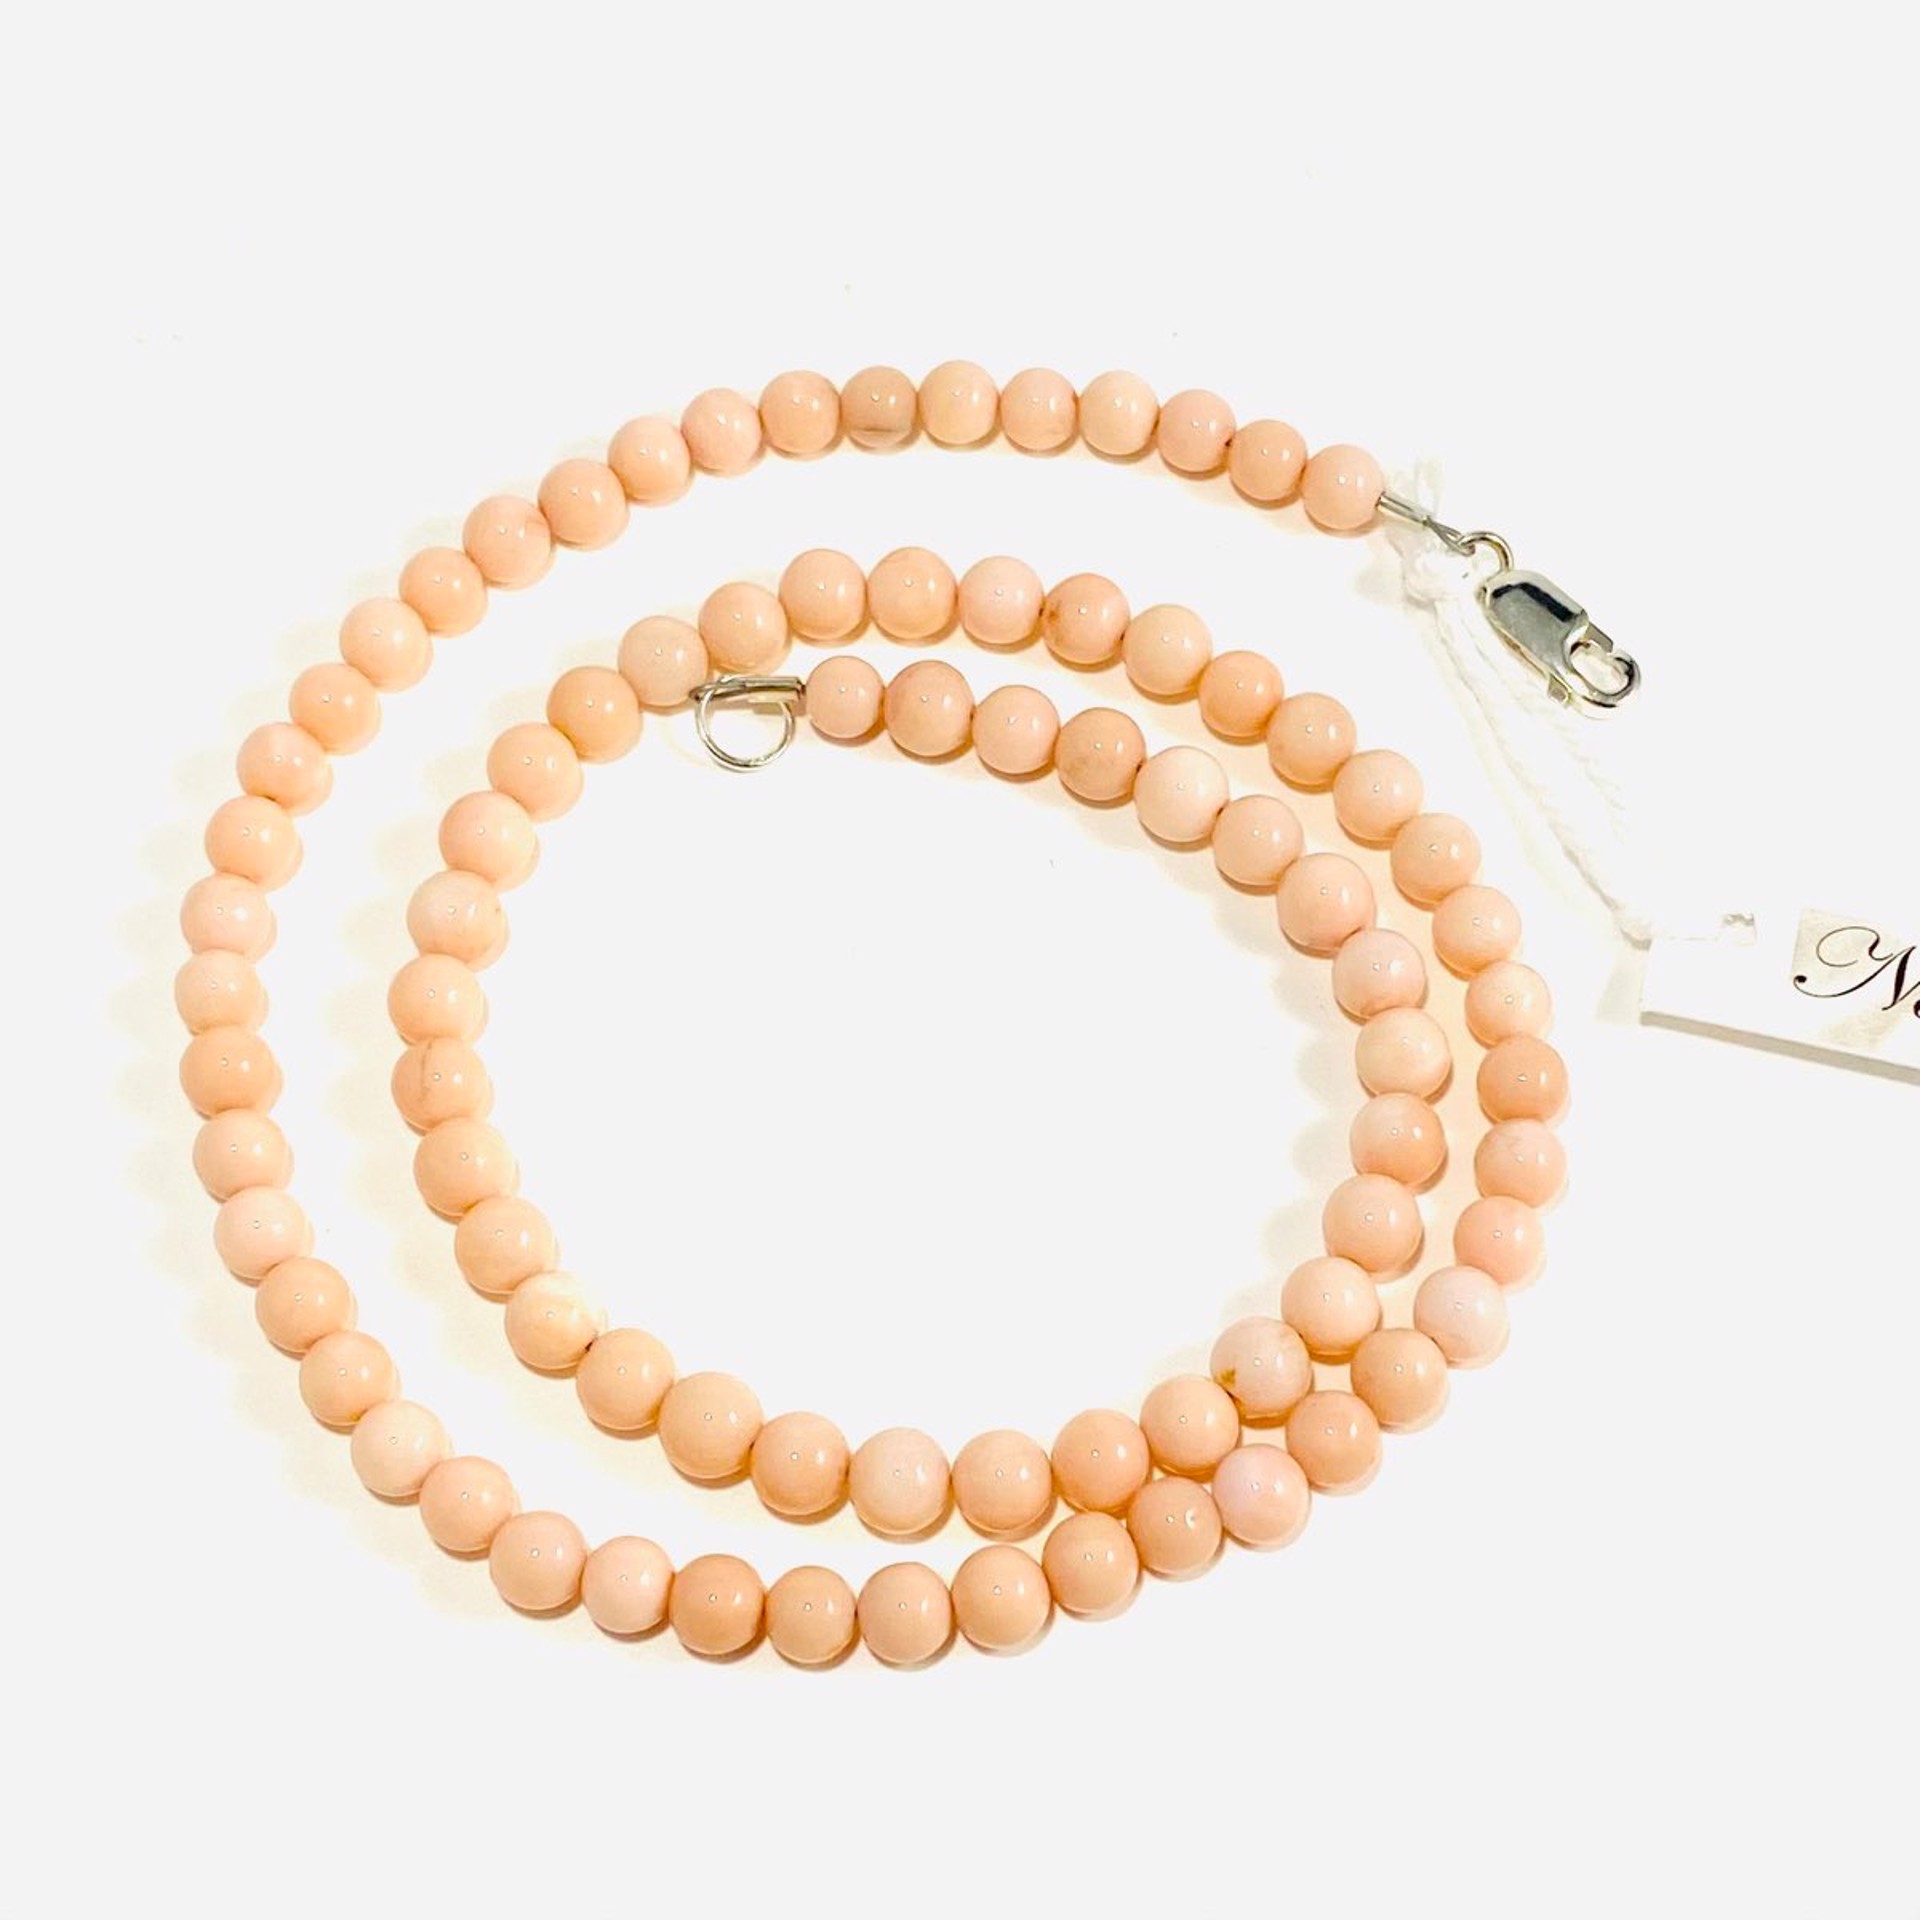 NT22-140 Round Pink Coral Bead Strand Necklace by Nance Trueworthy